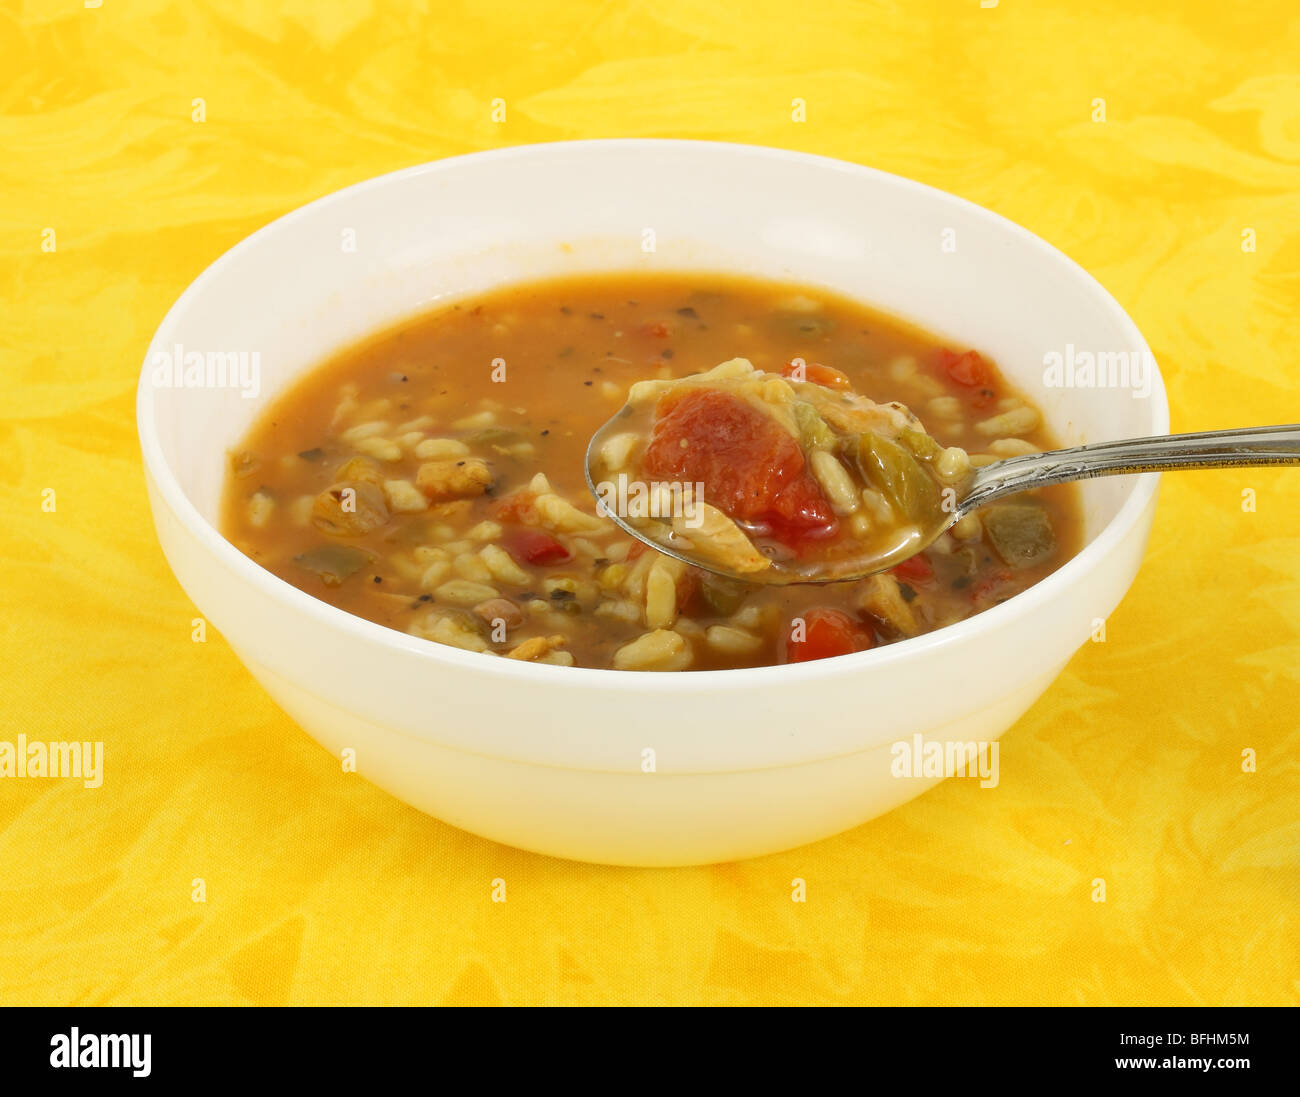 Spicy chicken soup in a white bowl with spoon Stock Photo